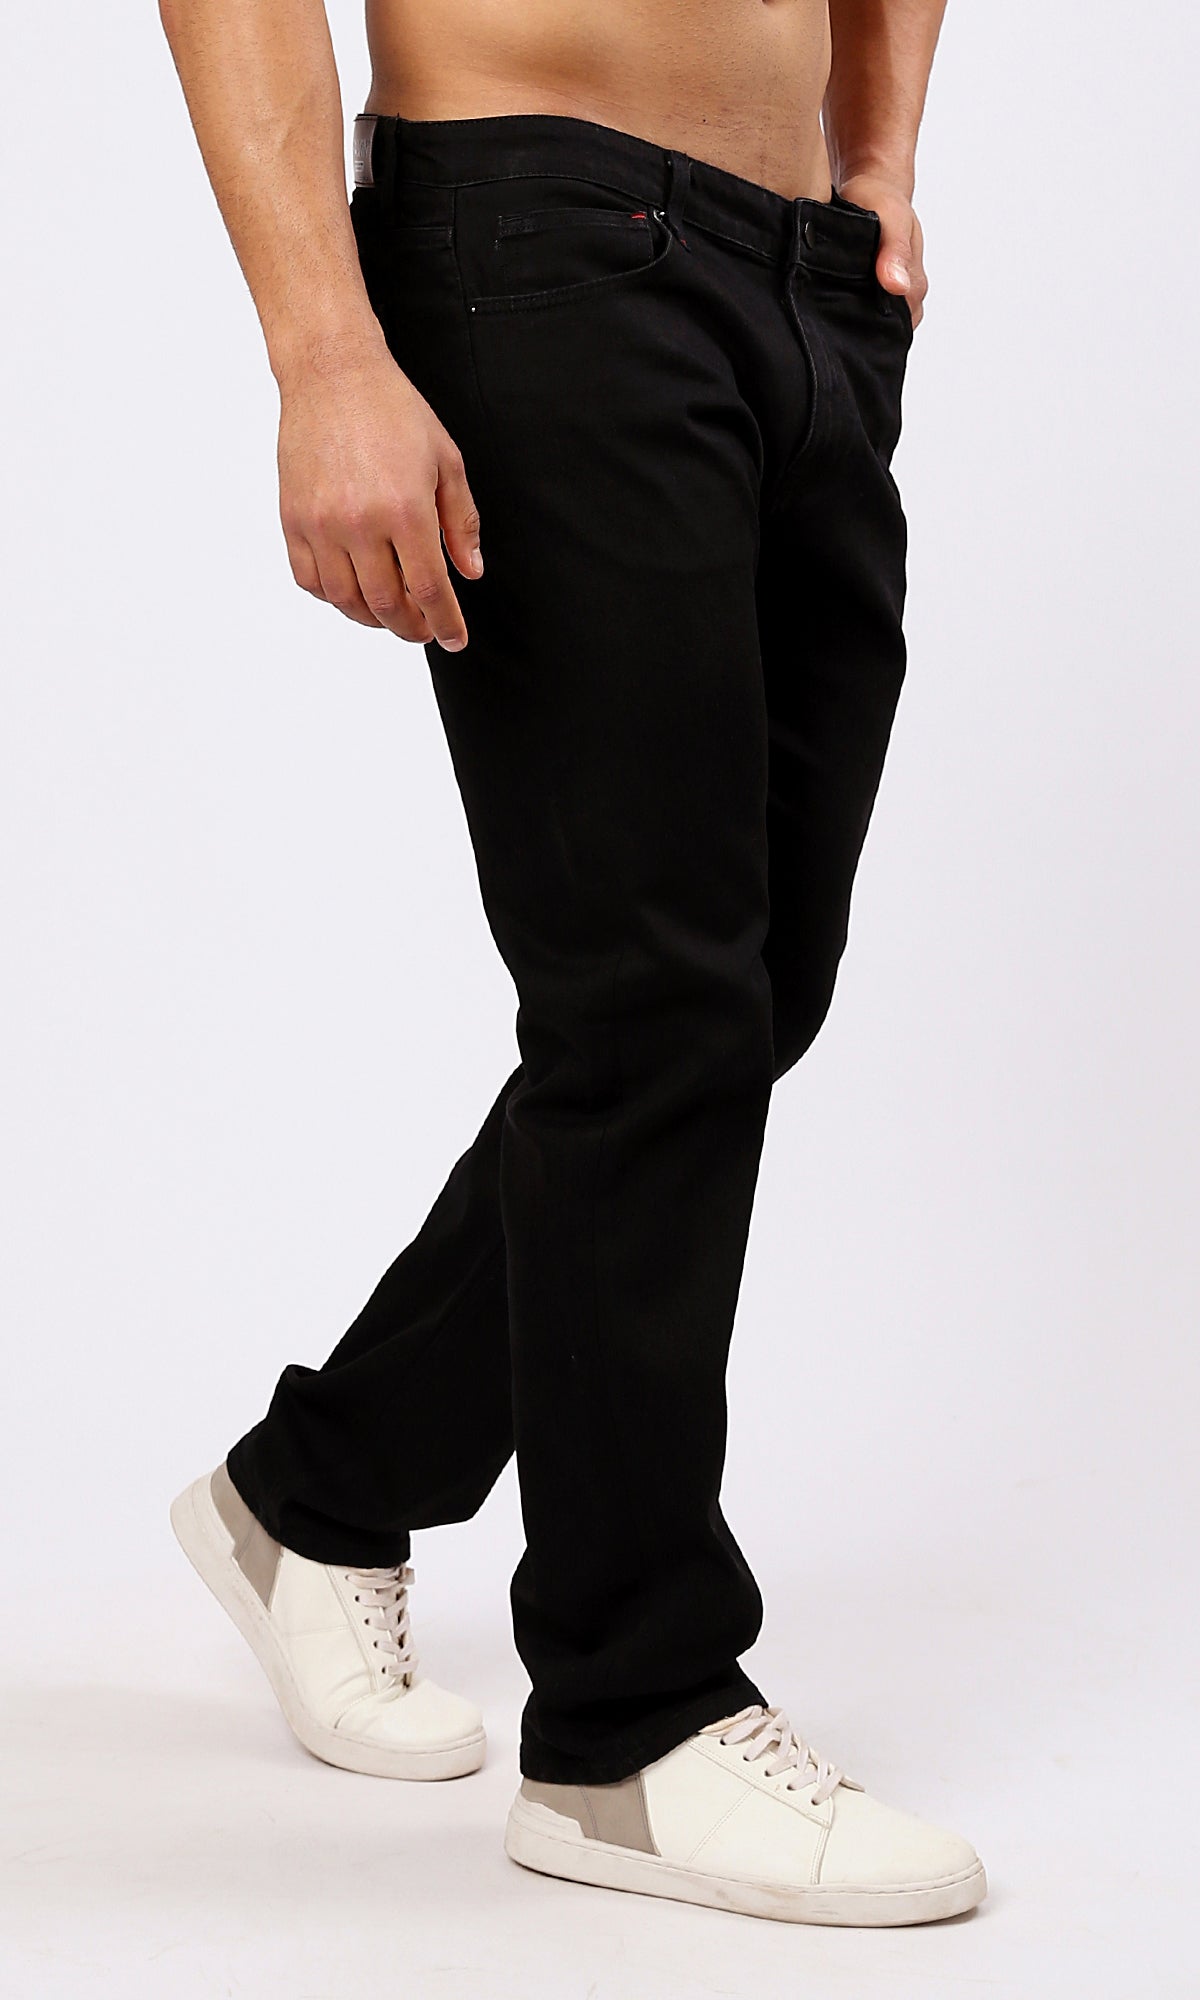 O189390 Black Casual Jeans With Five Pockets